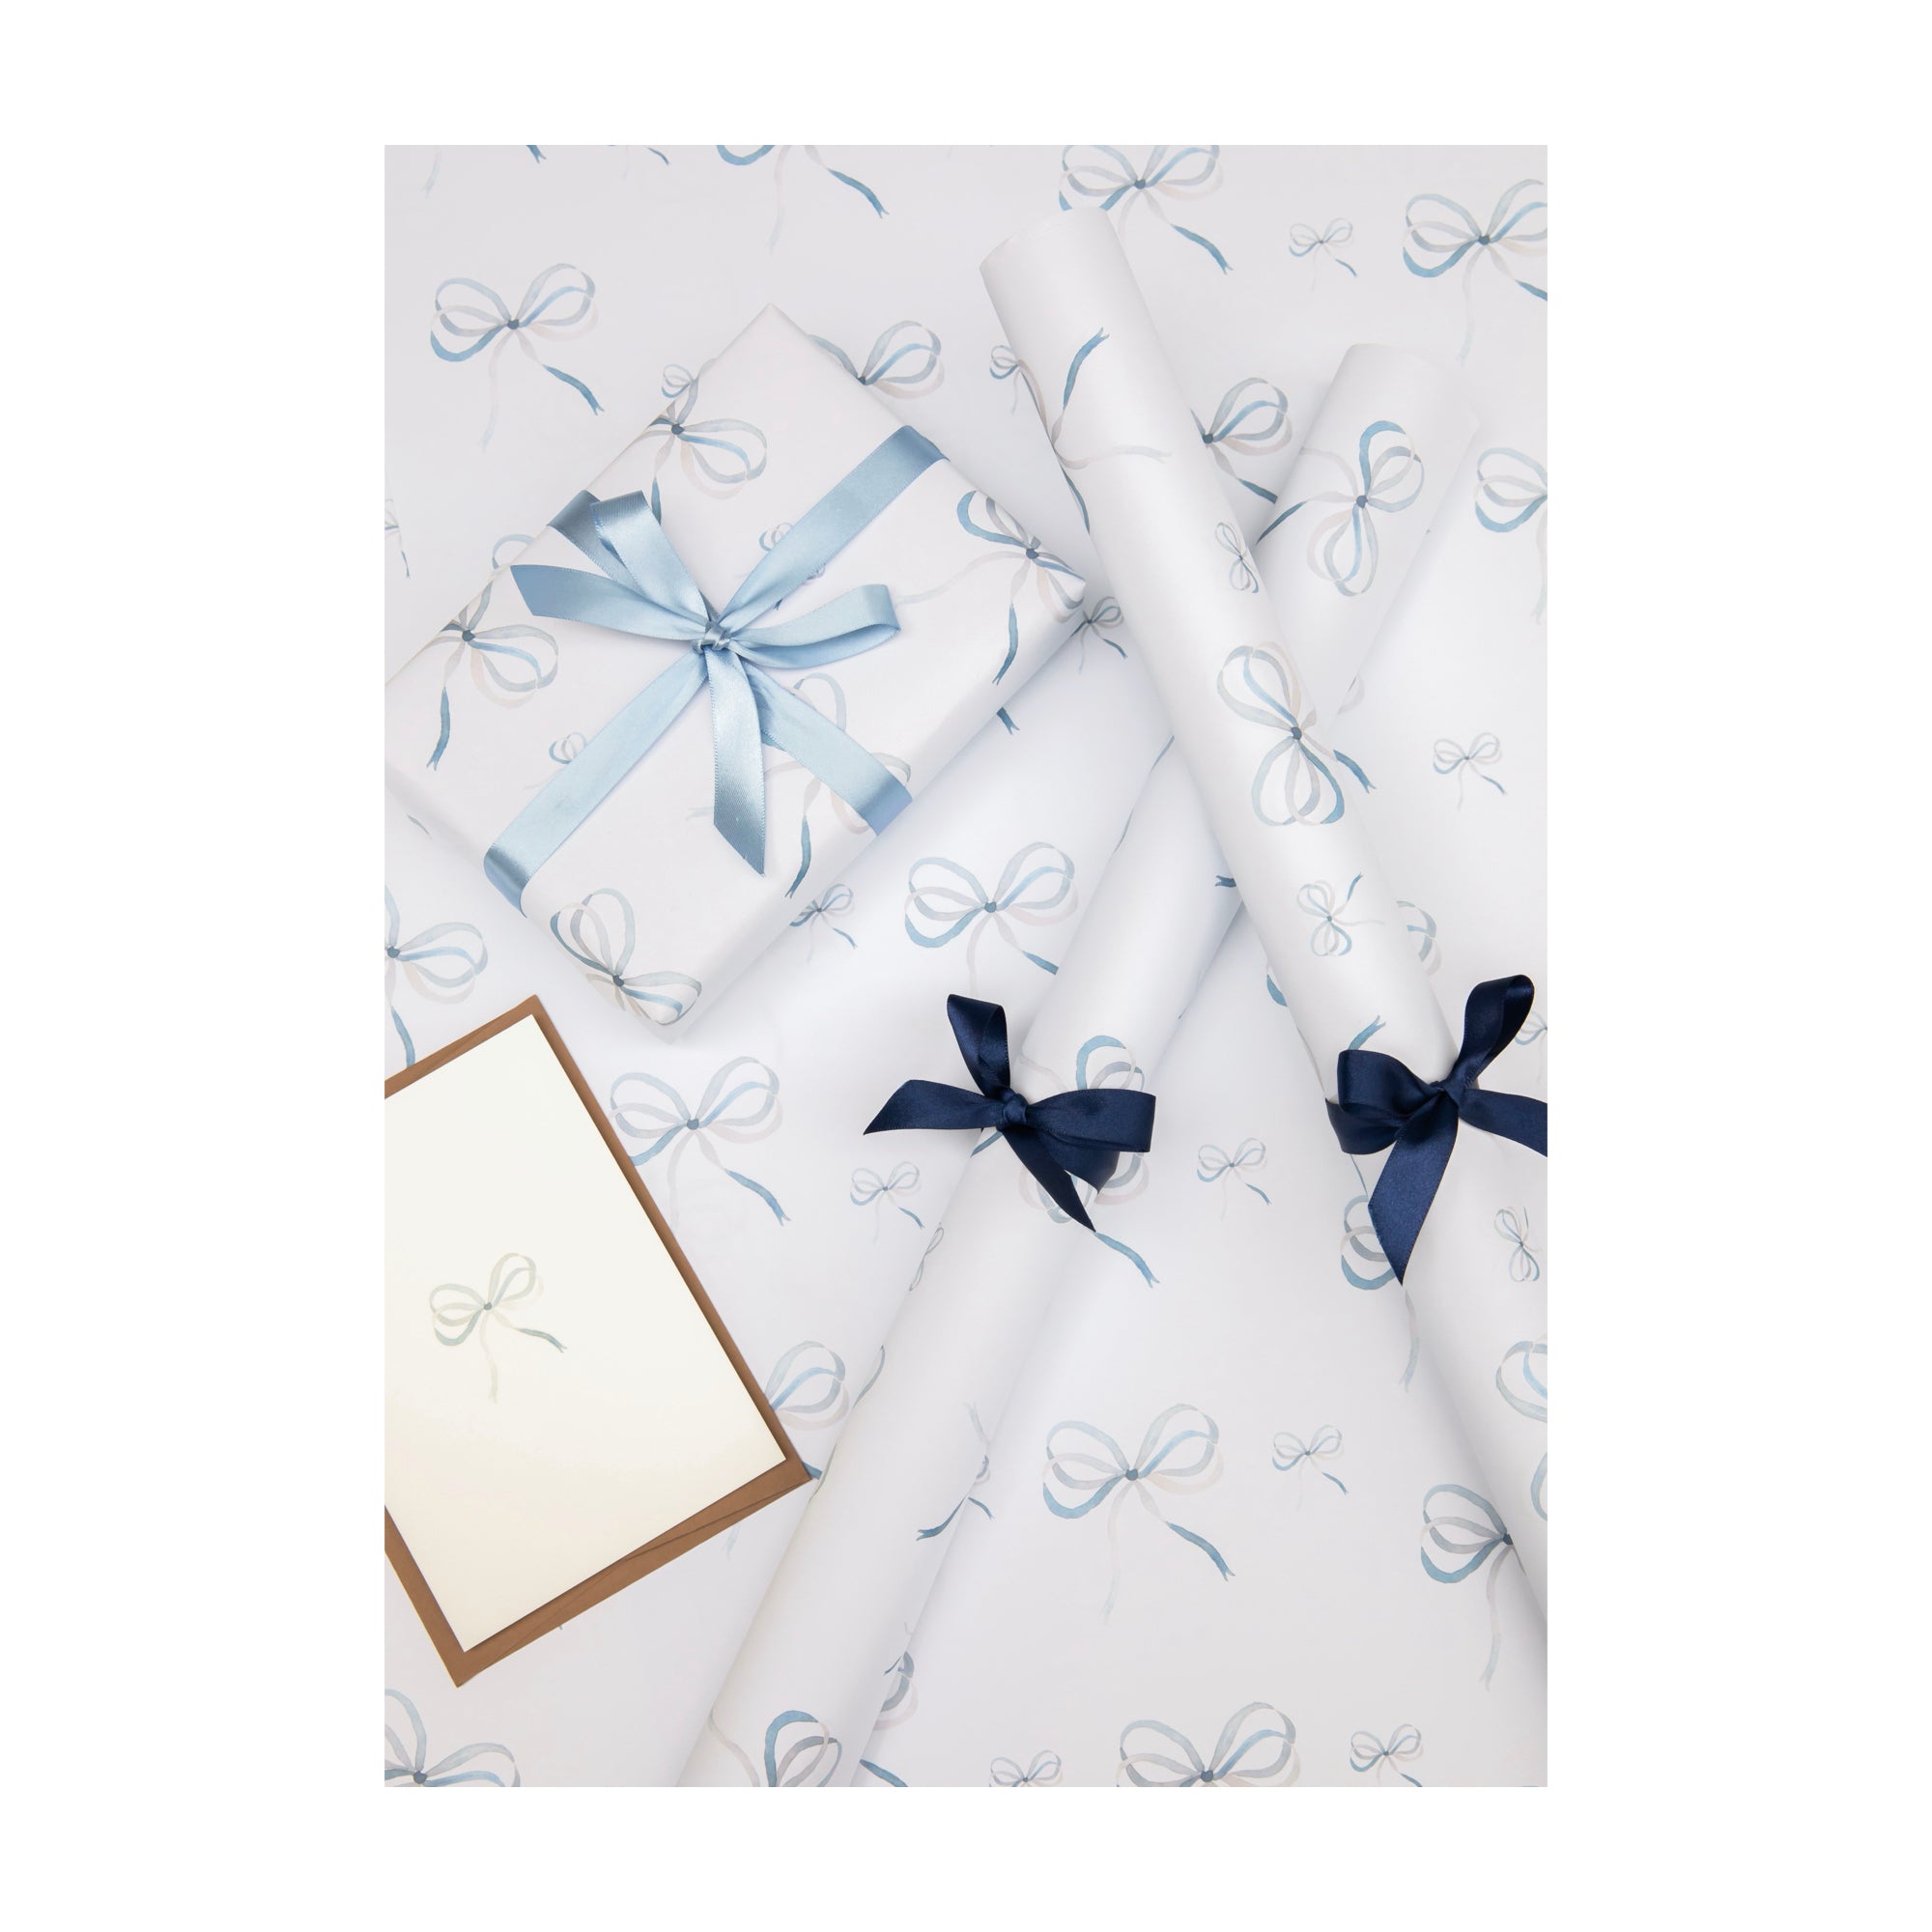 Lake blue bow wrapping paper by Memo Press